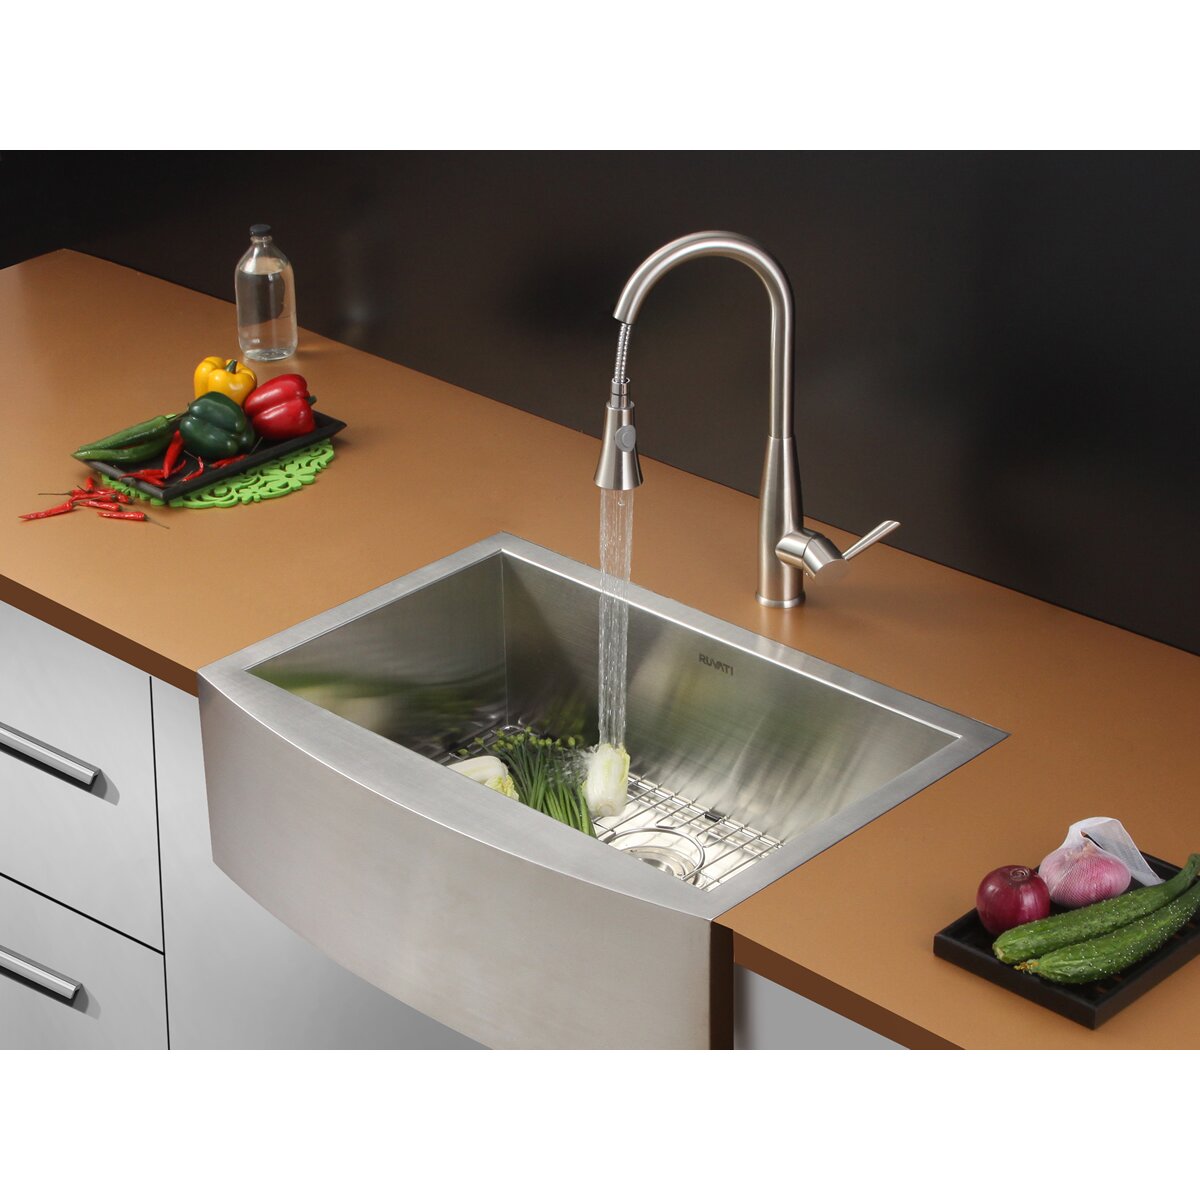 Ruvati 30" x 21" Kitchen Sink with Faucet & Reviews